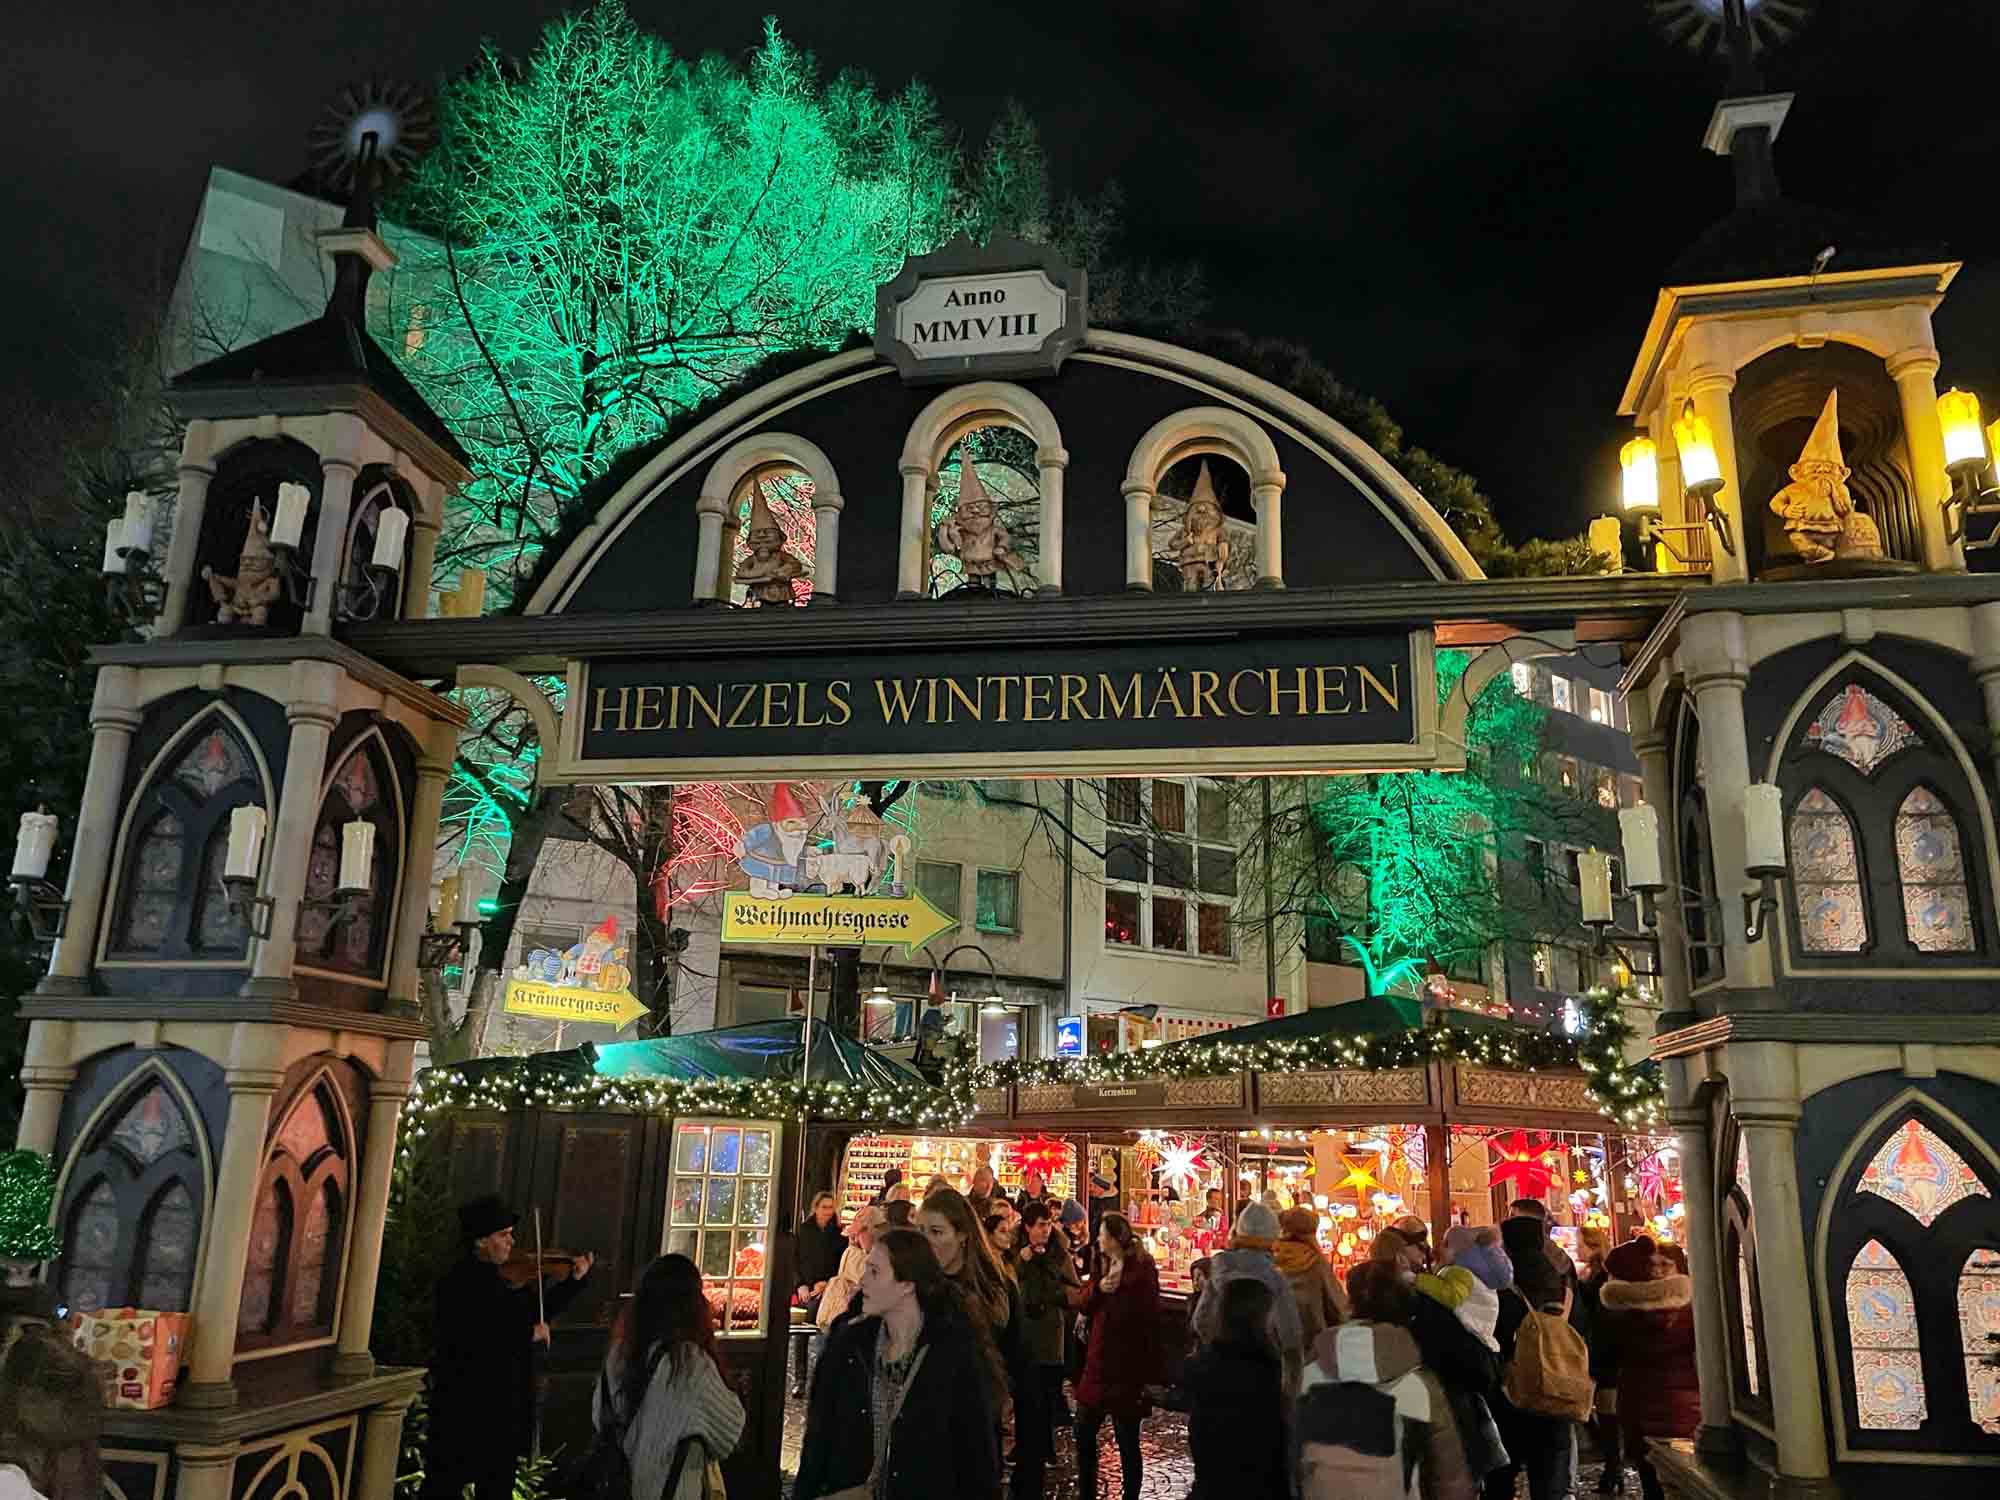 Entrance gate to a Christmas market in Cologne with a sign for "Heinzels Wintermarchen"